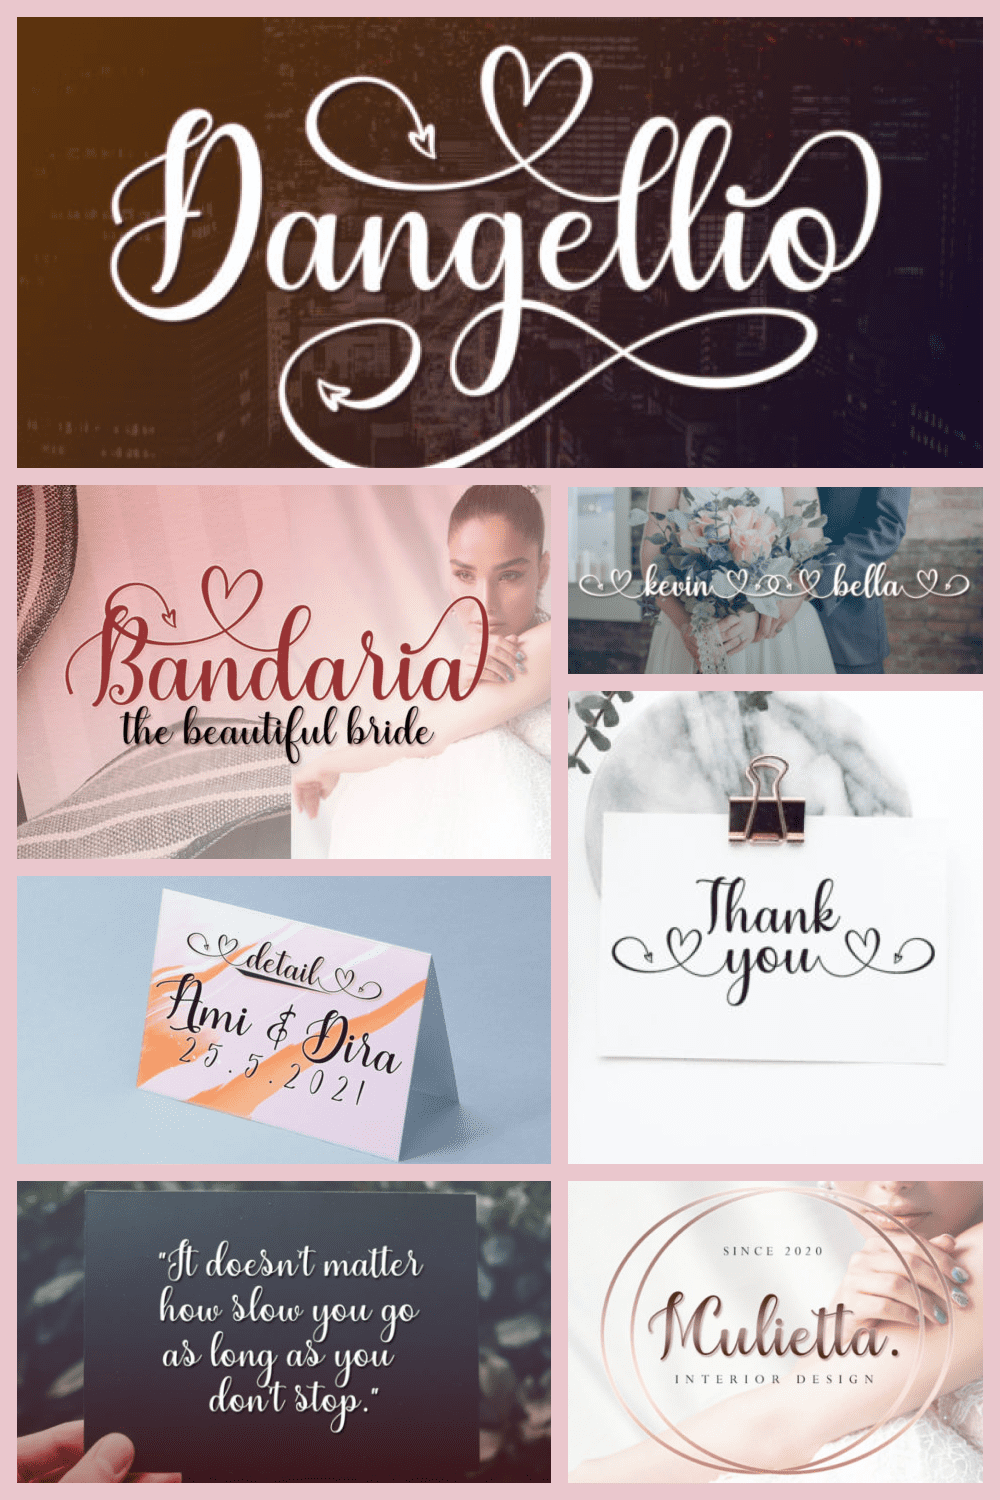 This font is ready to break hearts with its tenderness.